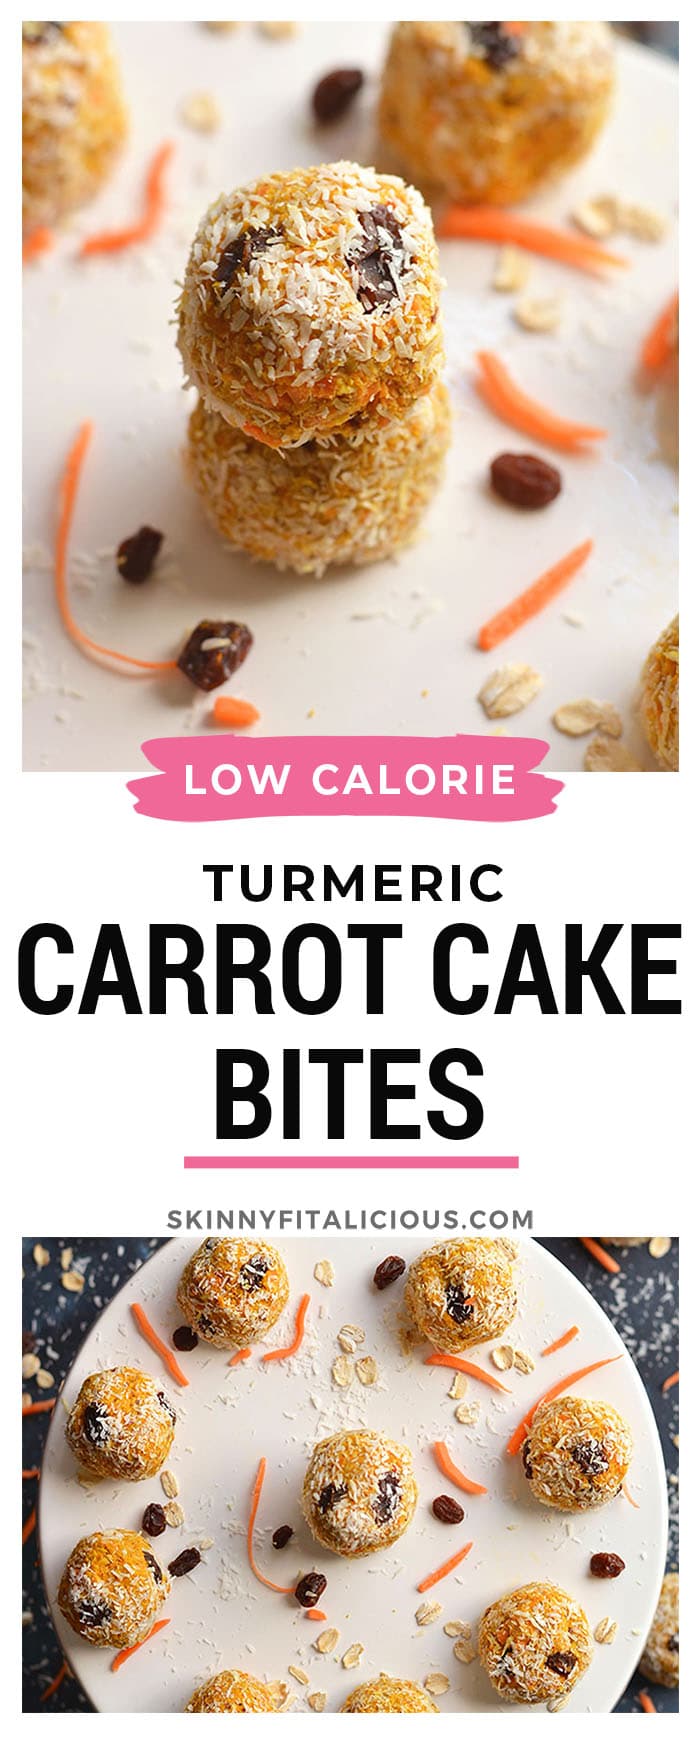 Turmeric Carrot Cake Bites! Made with 8 wholesome ingredients, these nutrition dense bites are a delicious no bake snack you can take with you anywhere.